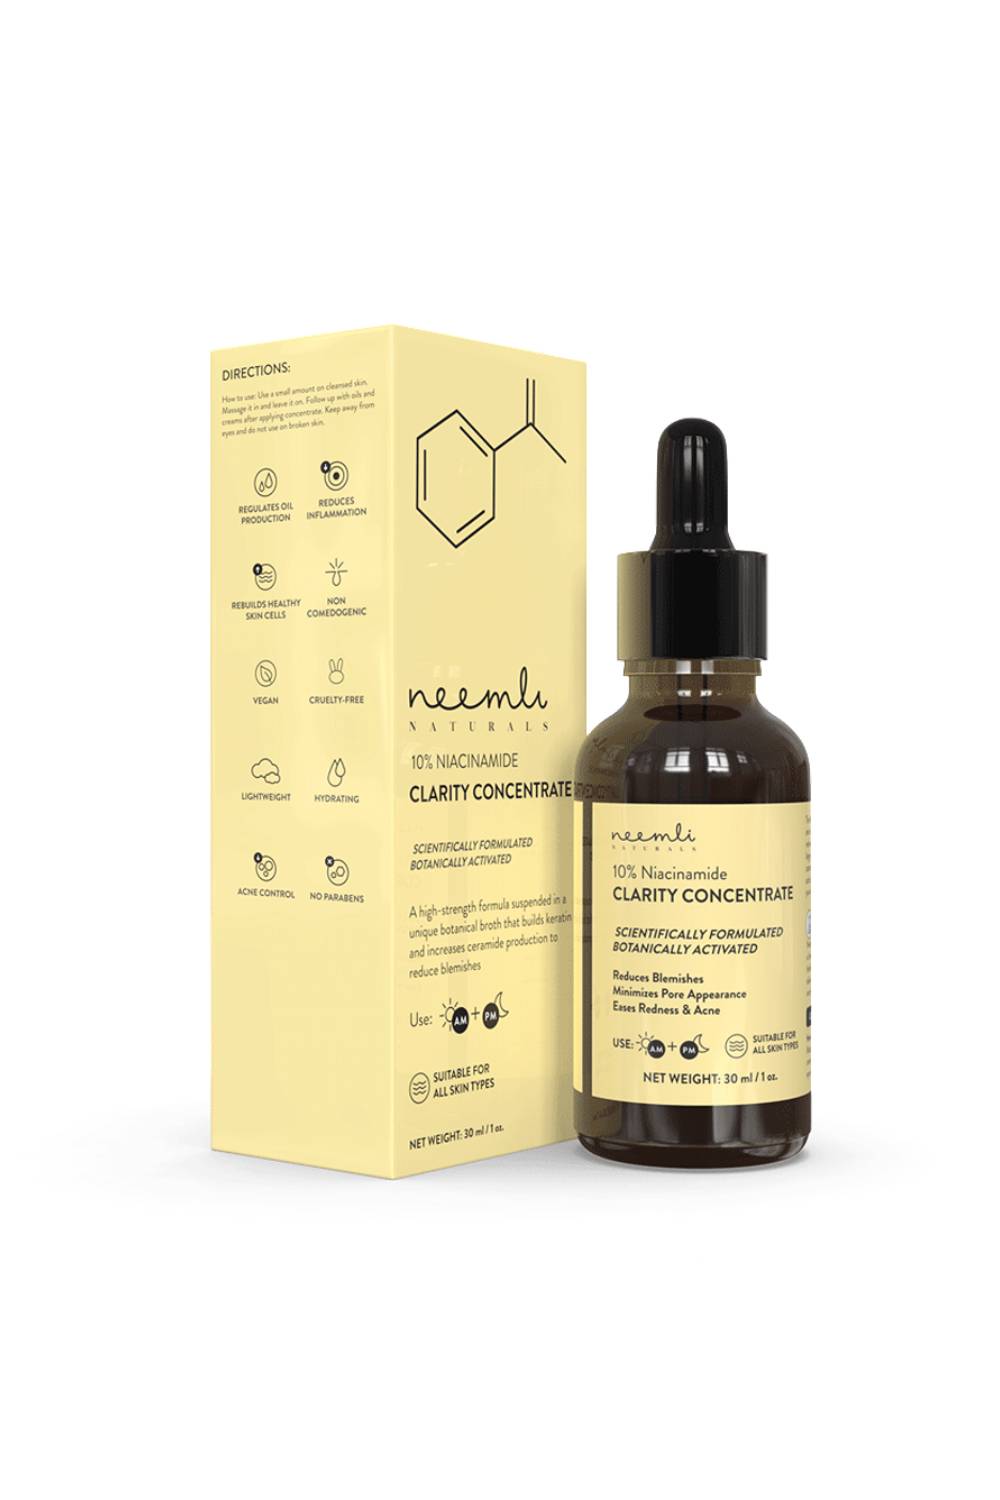 10% Niacinamide Clarity Concentrate-30ml